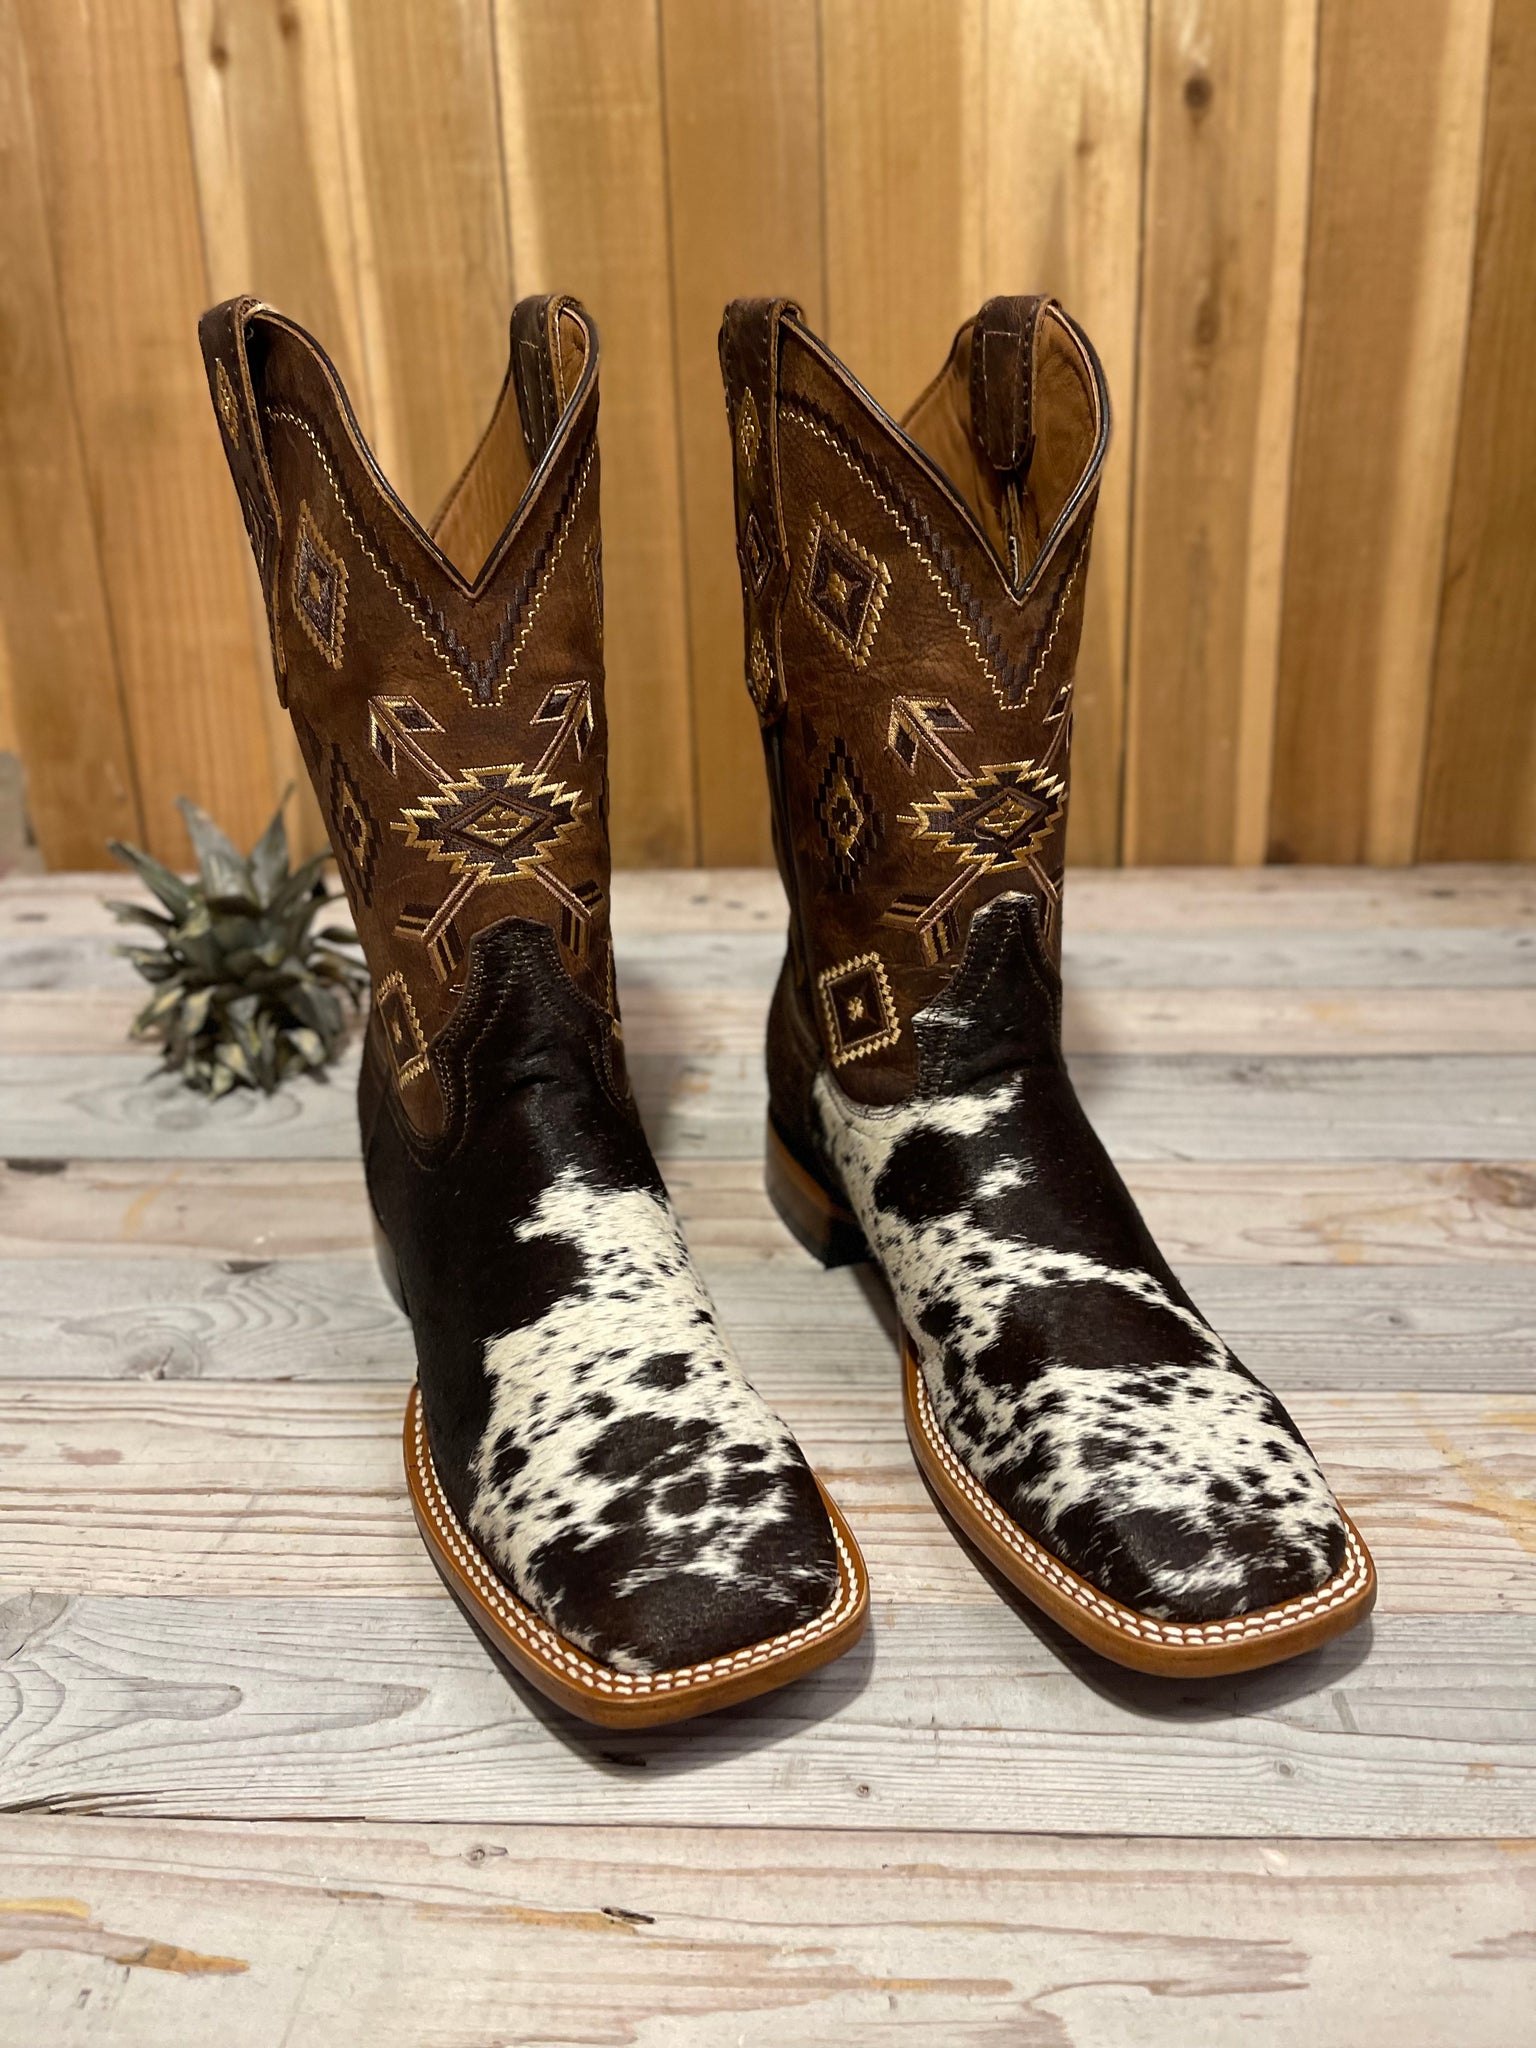 Exotic Leather Boot “ Ace ” Cowhide Size 10.5